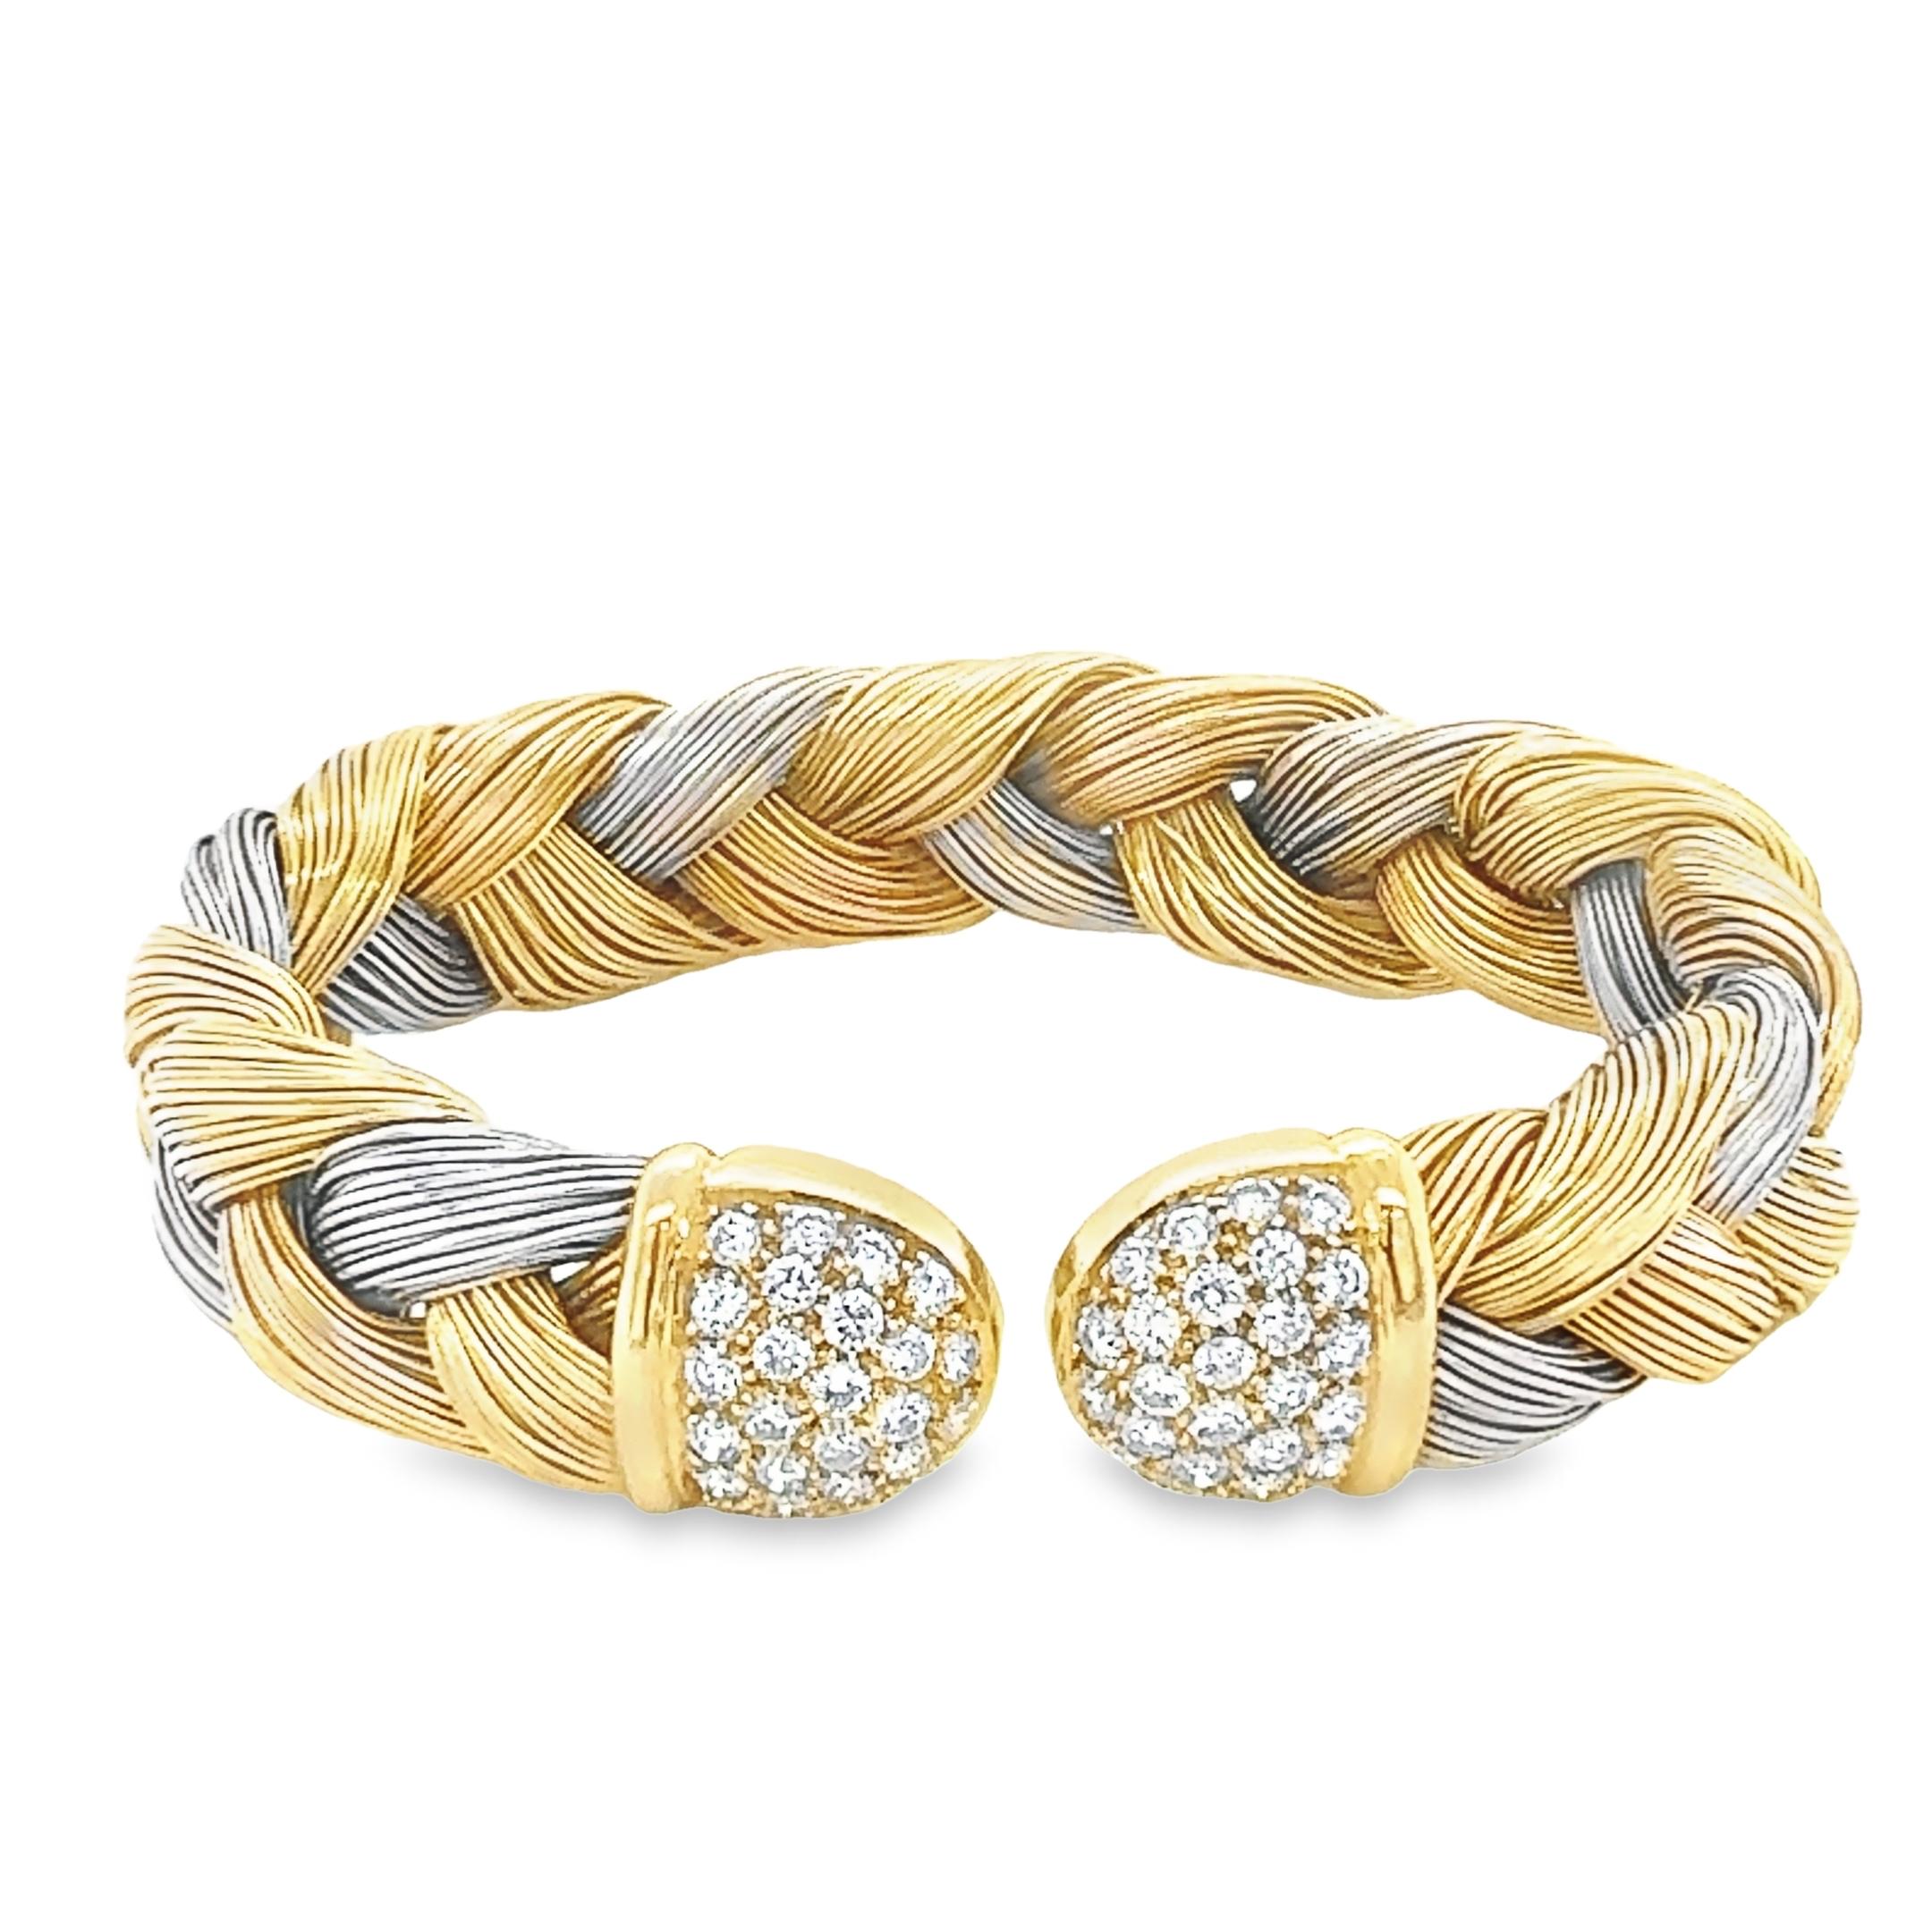 This Bespoke Italian woven cuff bracelet is crafted in two tones of 18 carats yellow and white gold all with high polished finish, embellished with 52 natural round brilliant cut diamonds that seamlessly wrap around the ends of the cuff bangle.
it